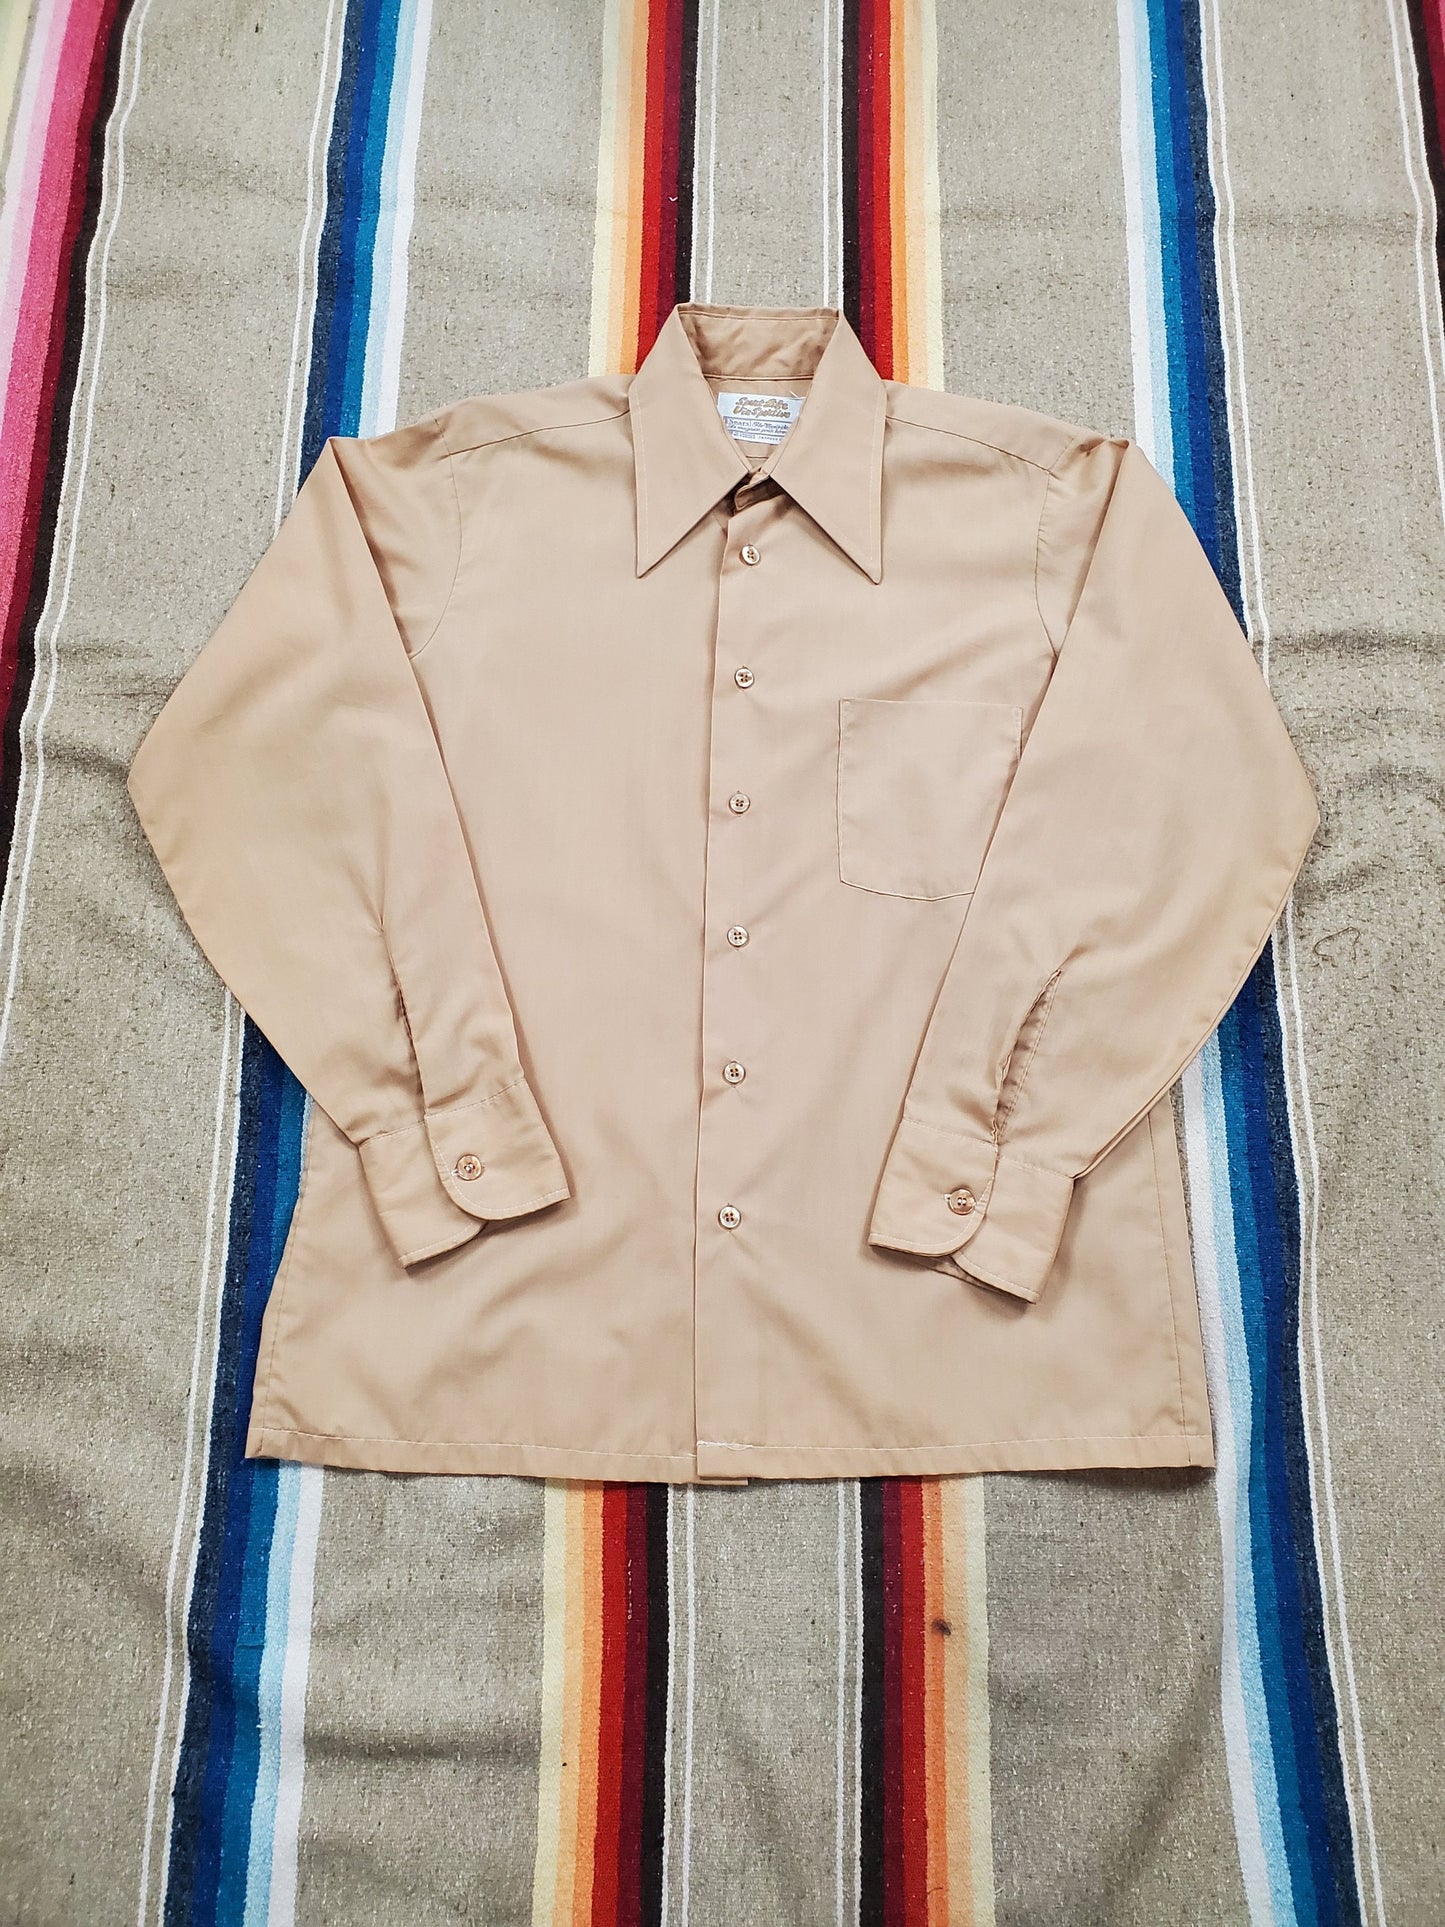 1970s/1980s Sears Sport Life Button Up Shirt Size M